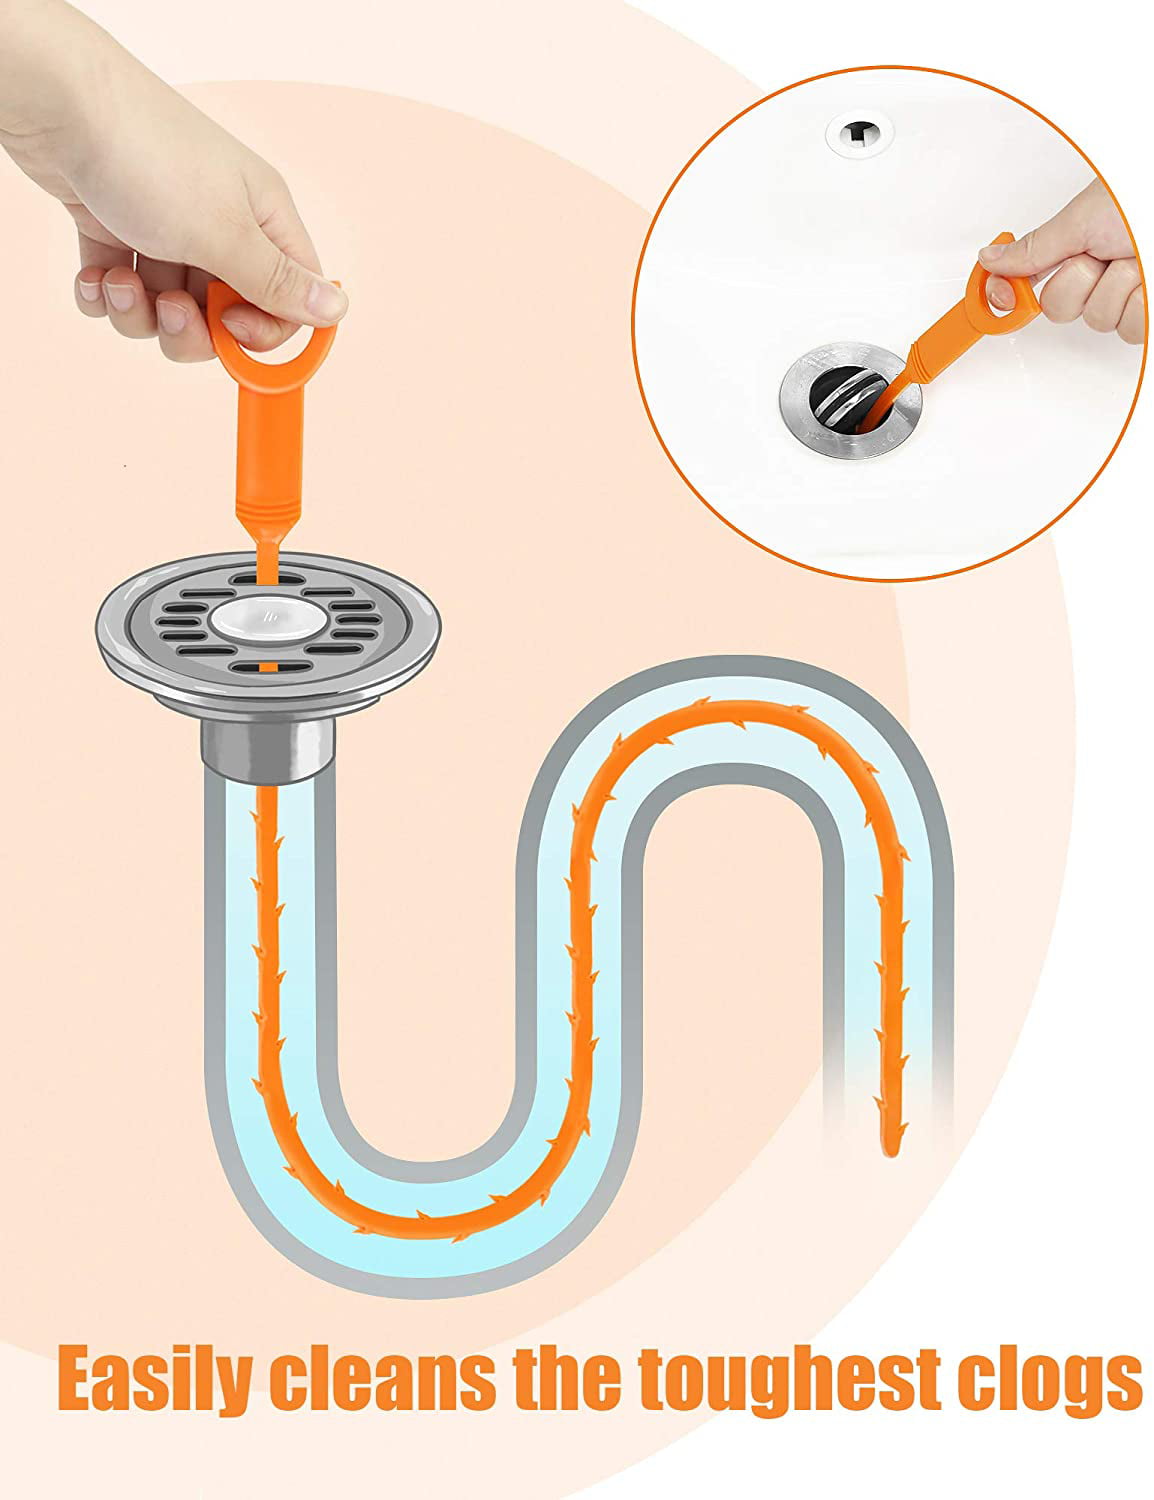 liboyixi 5 Pack Drain Clog Remover Tool, Sink Snake Cleaner Drain Auger  Sewer toilet dredge, Snake Drain for Hair Remover Tool For Sewer, Toilet,  Kitchen Sink, Bathroom Tub - Coupon Codes, Promo